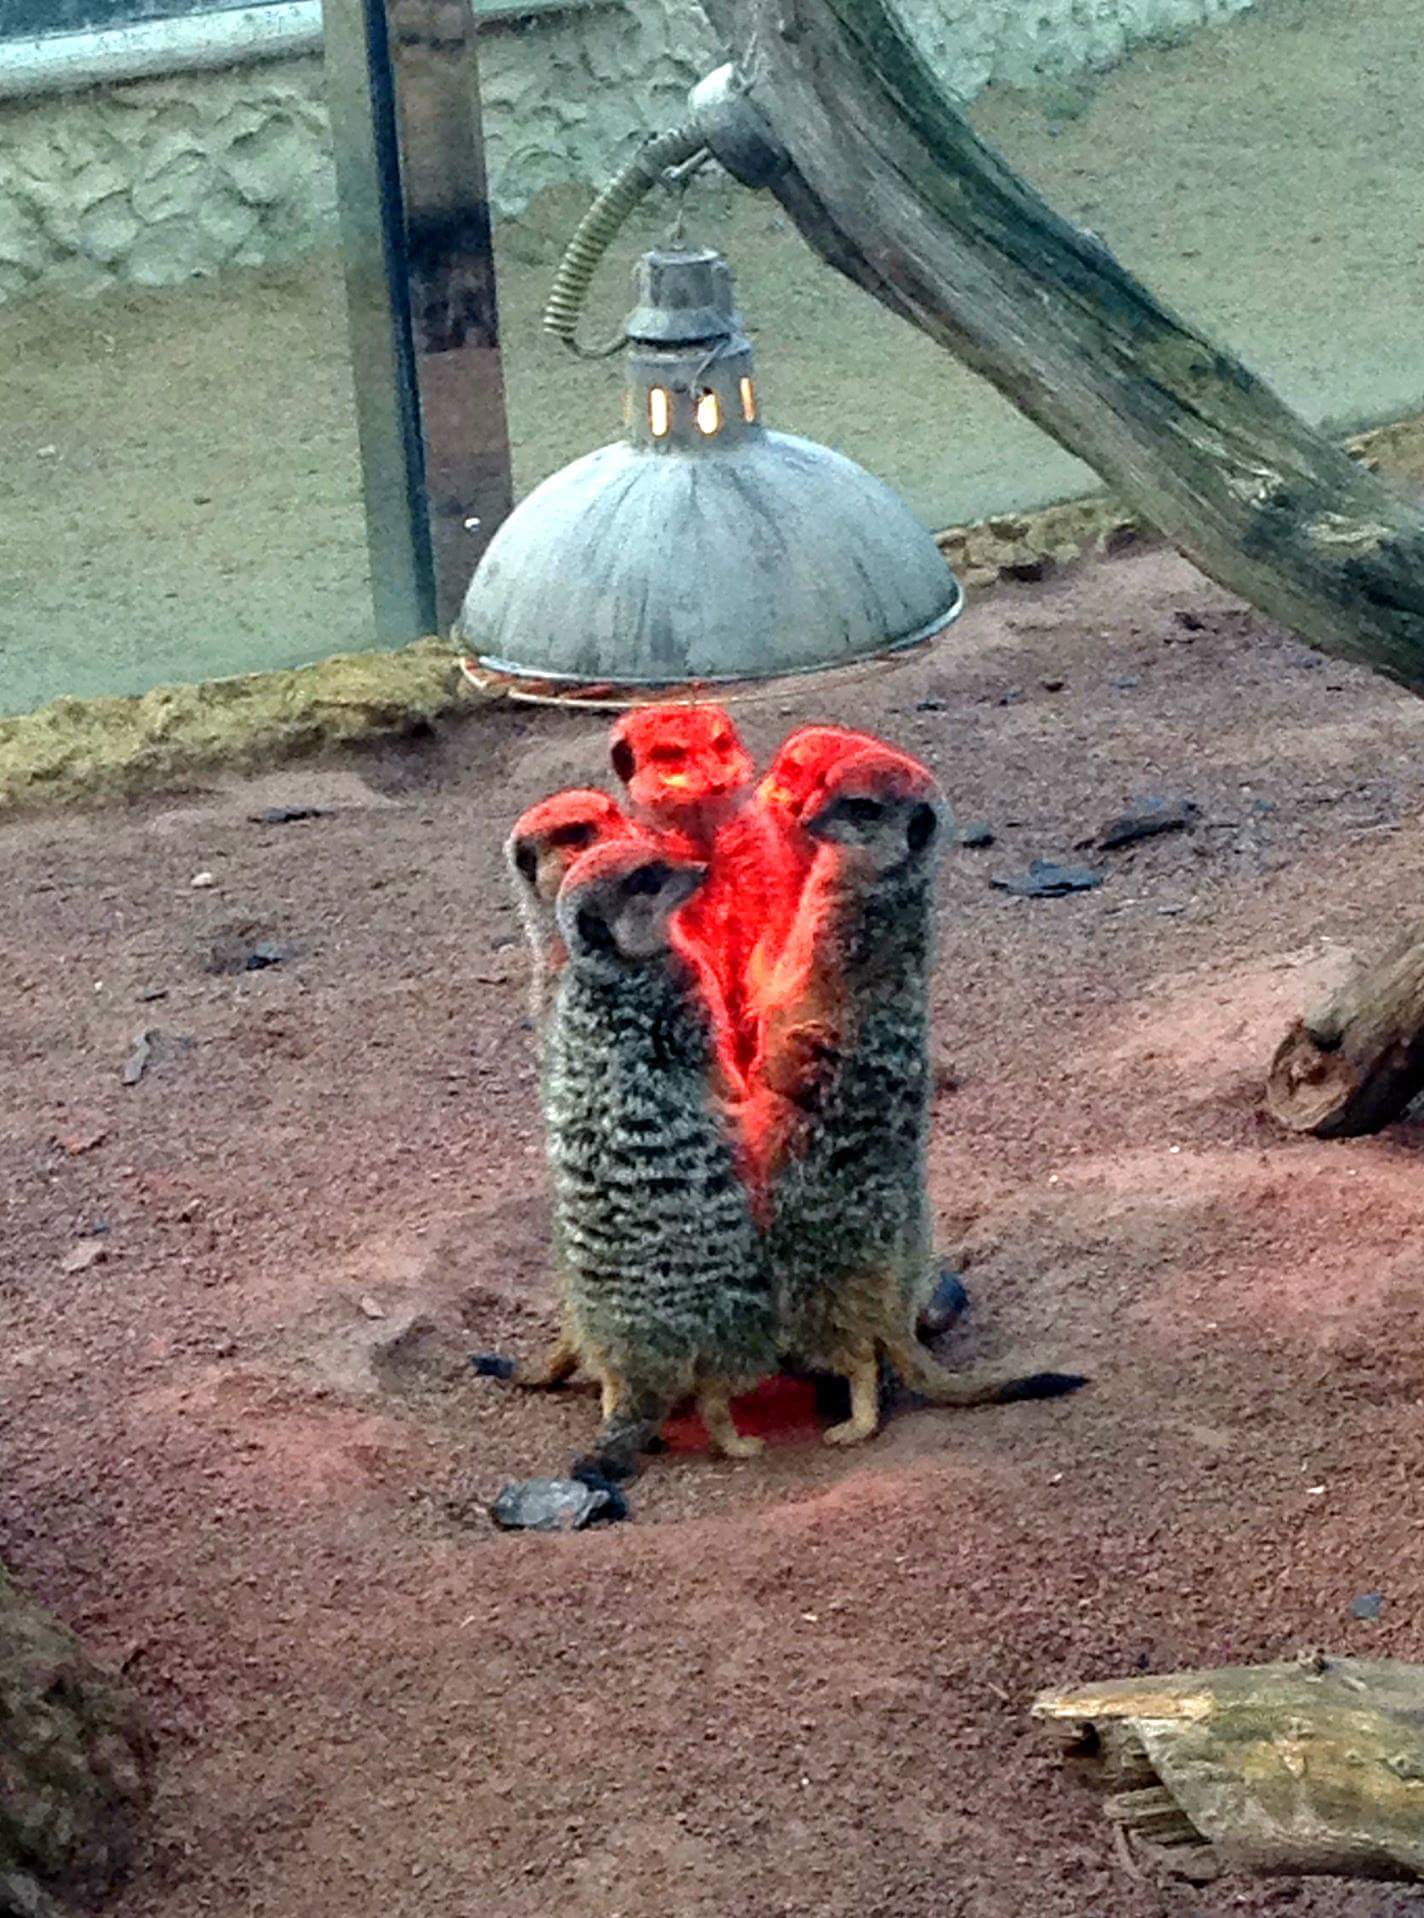 The Meerkats have gathered to summon the Prince Of ***ing Darkness